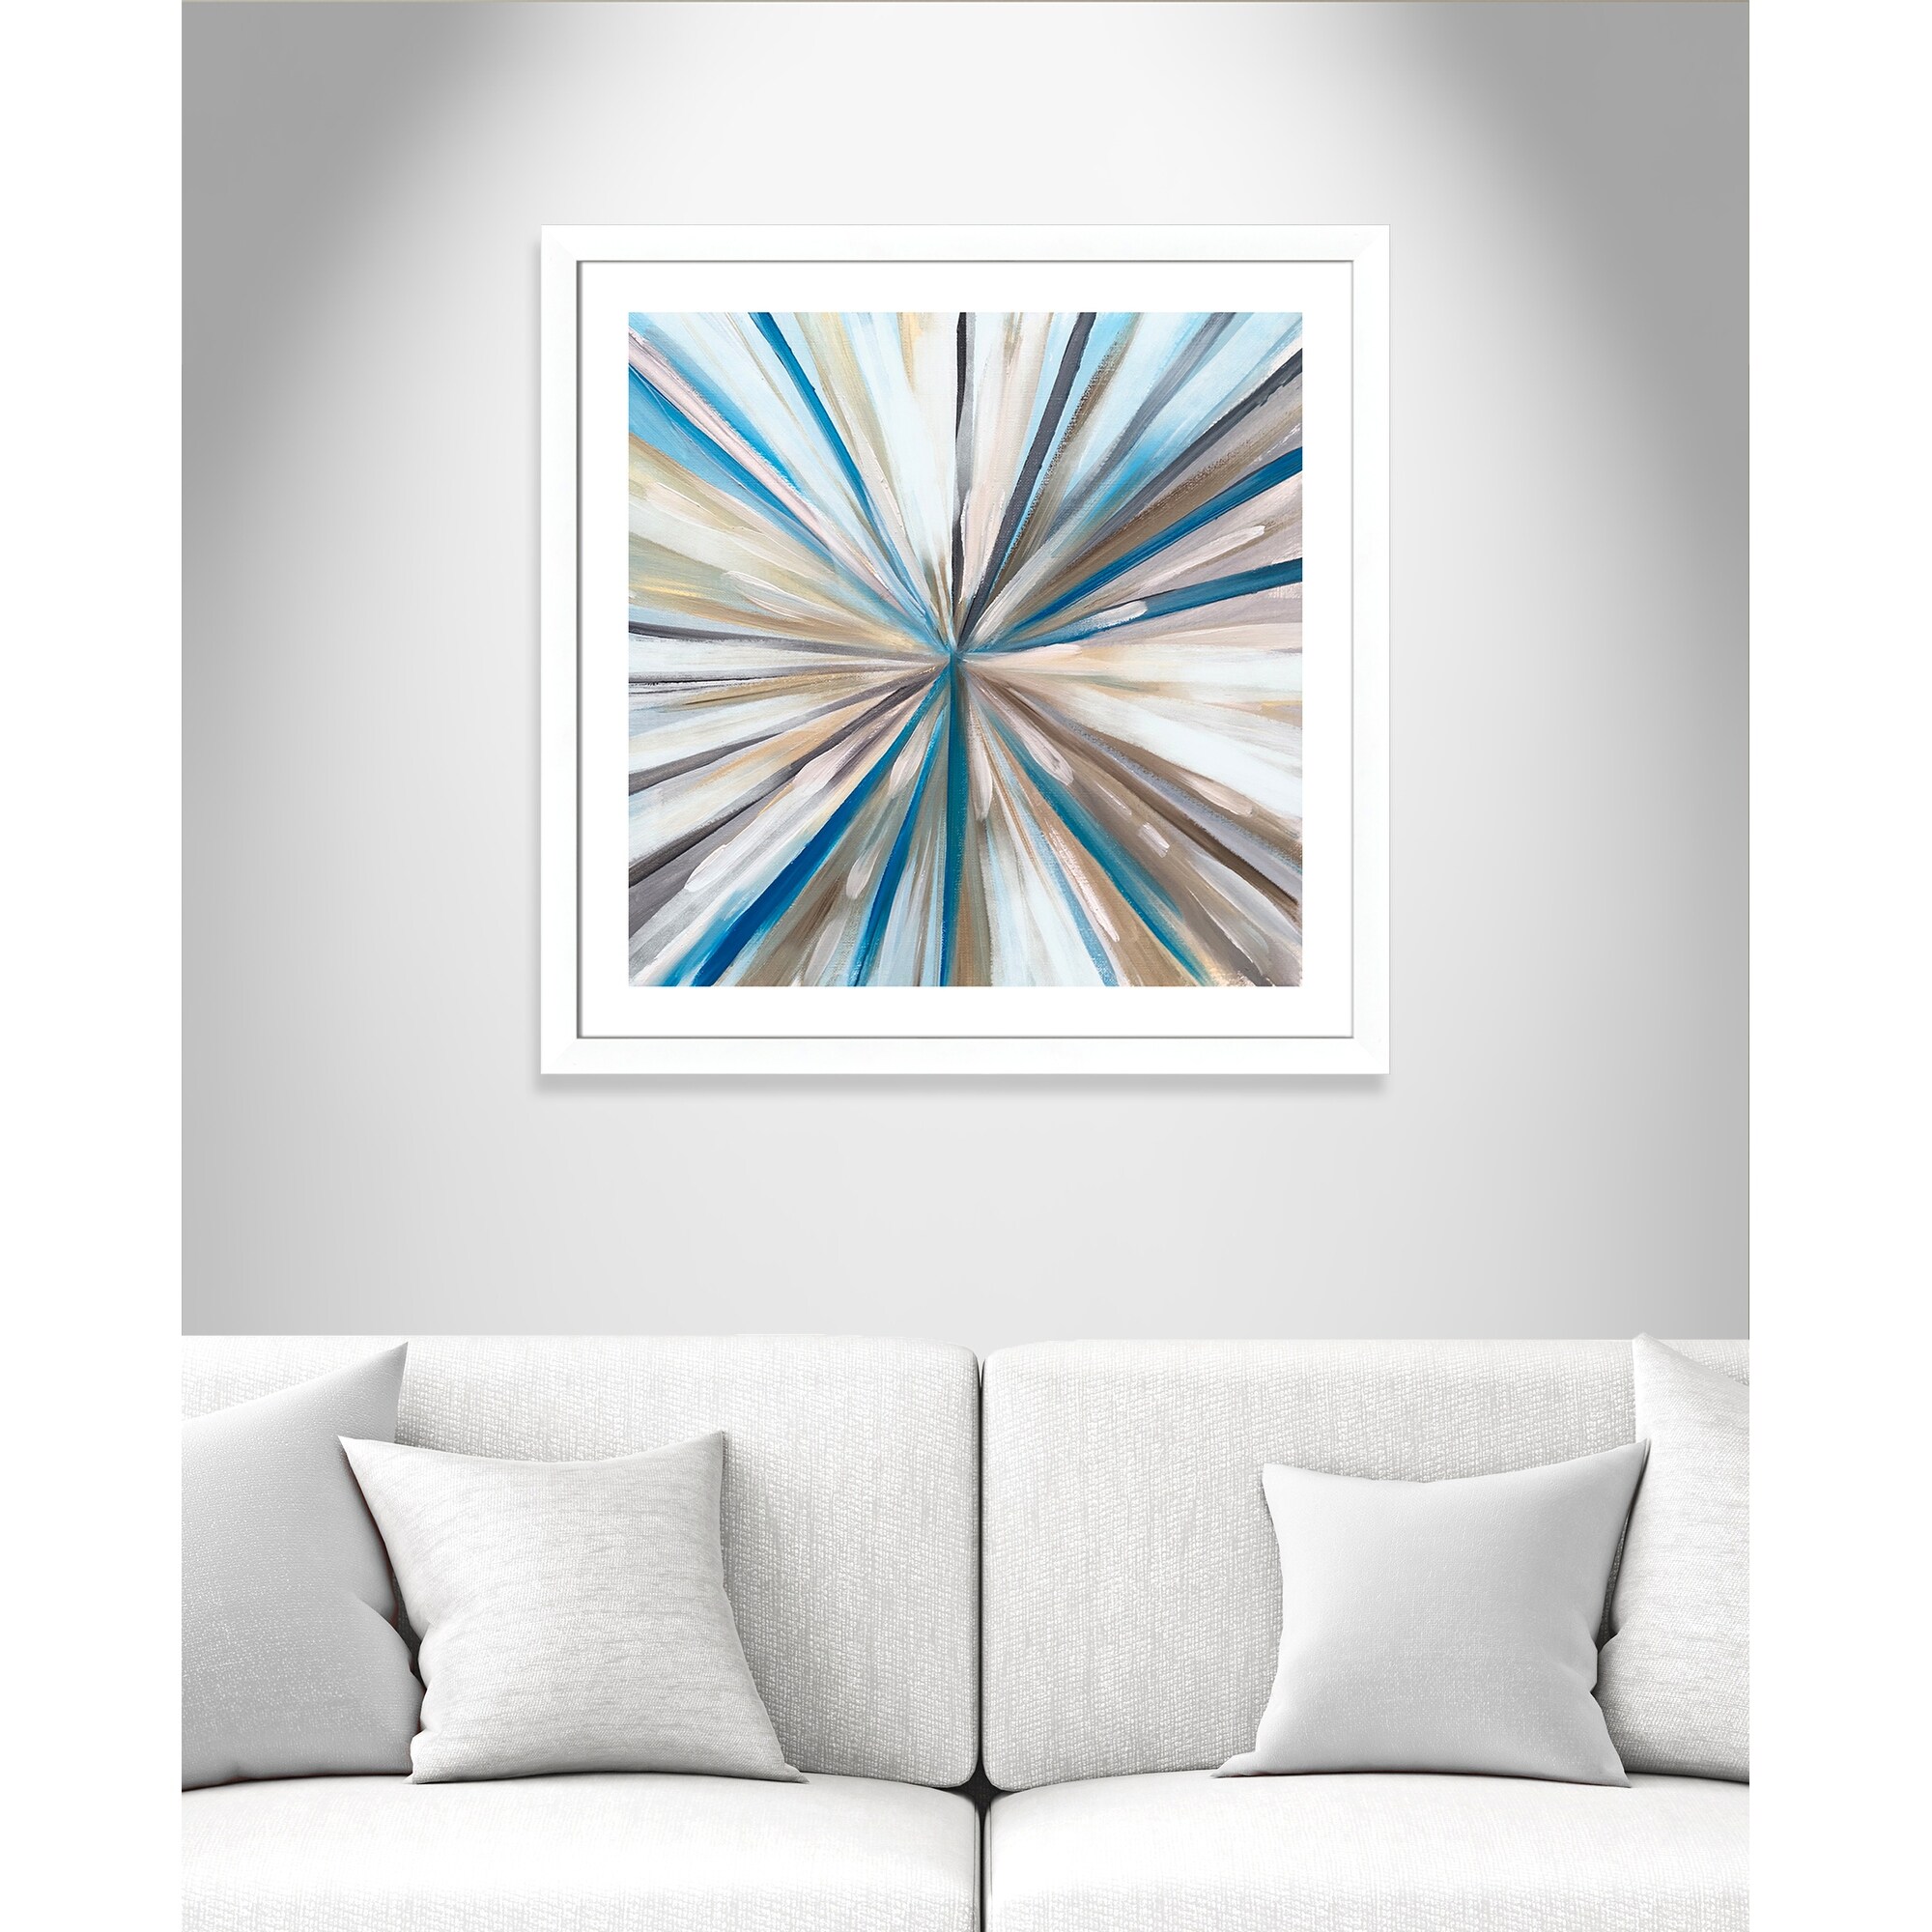 Spin Art For Your Walls - ARTBAR